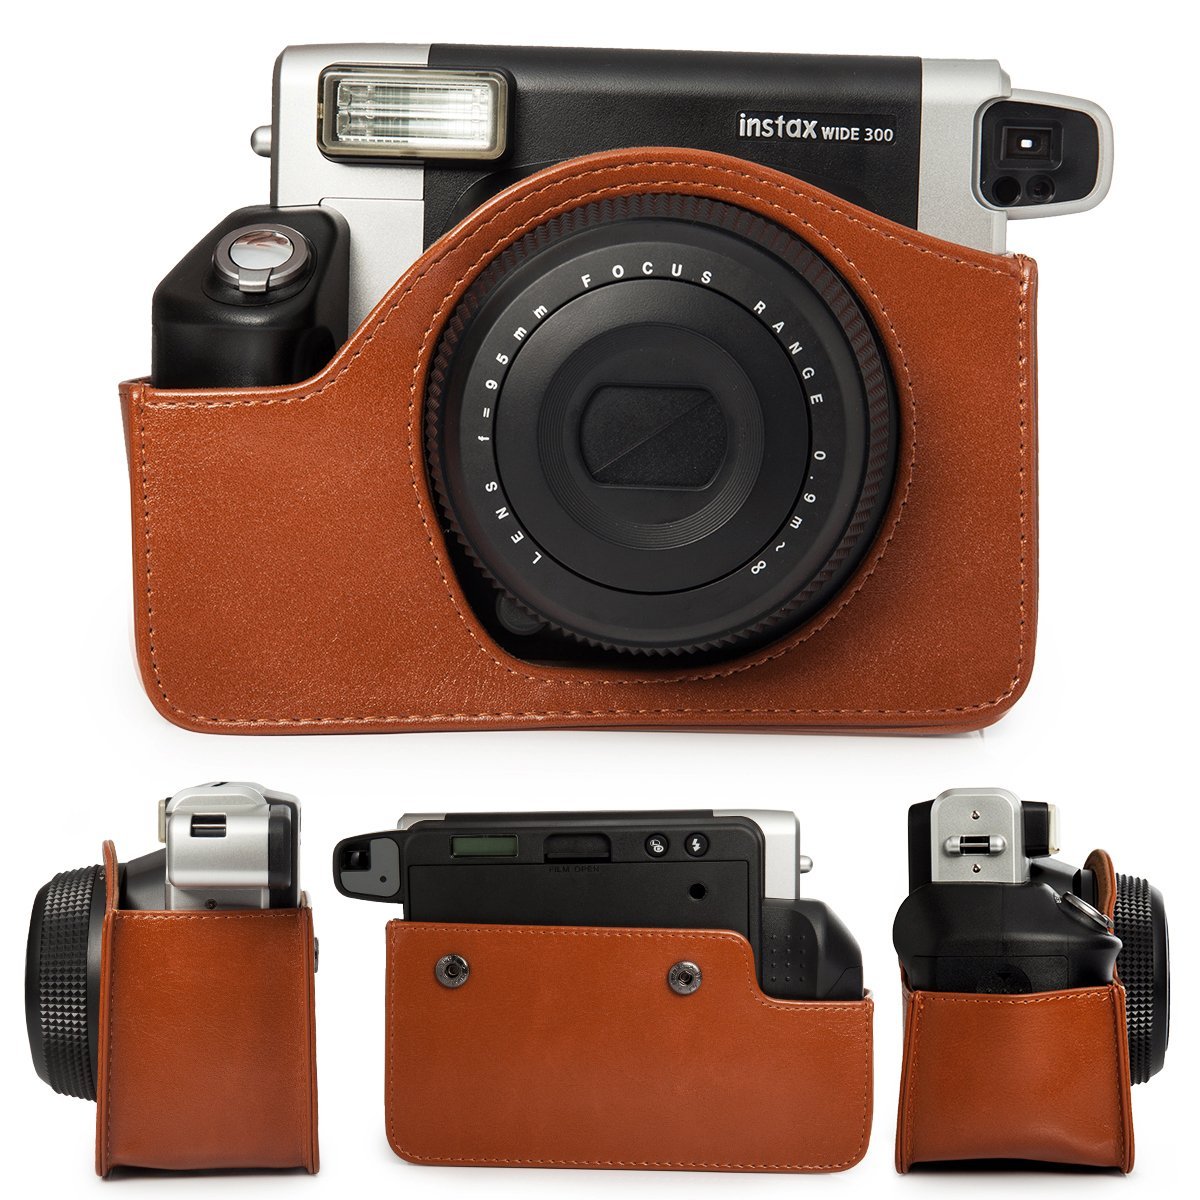 ZENKO WIDE 300 INSTAX CAMERA COVER POUCH BAG BROWN